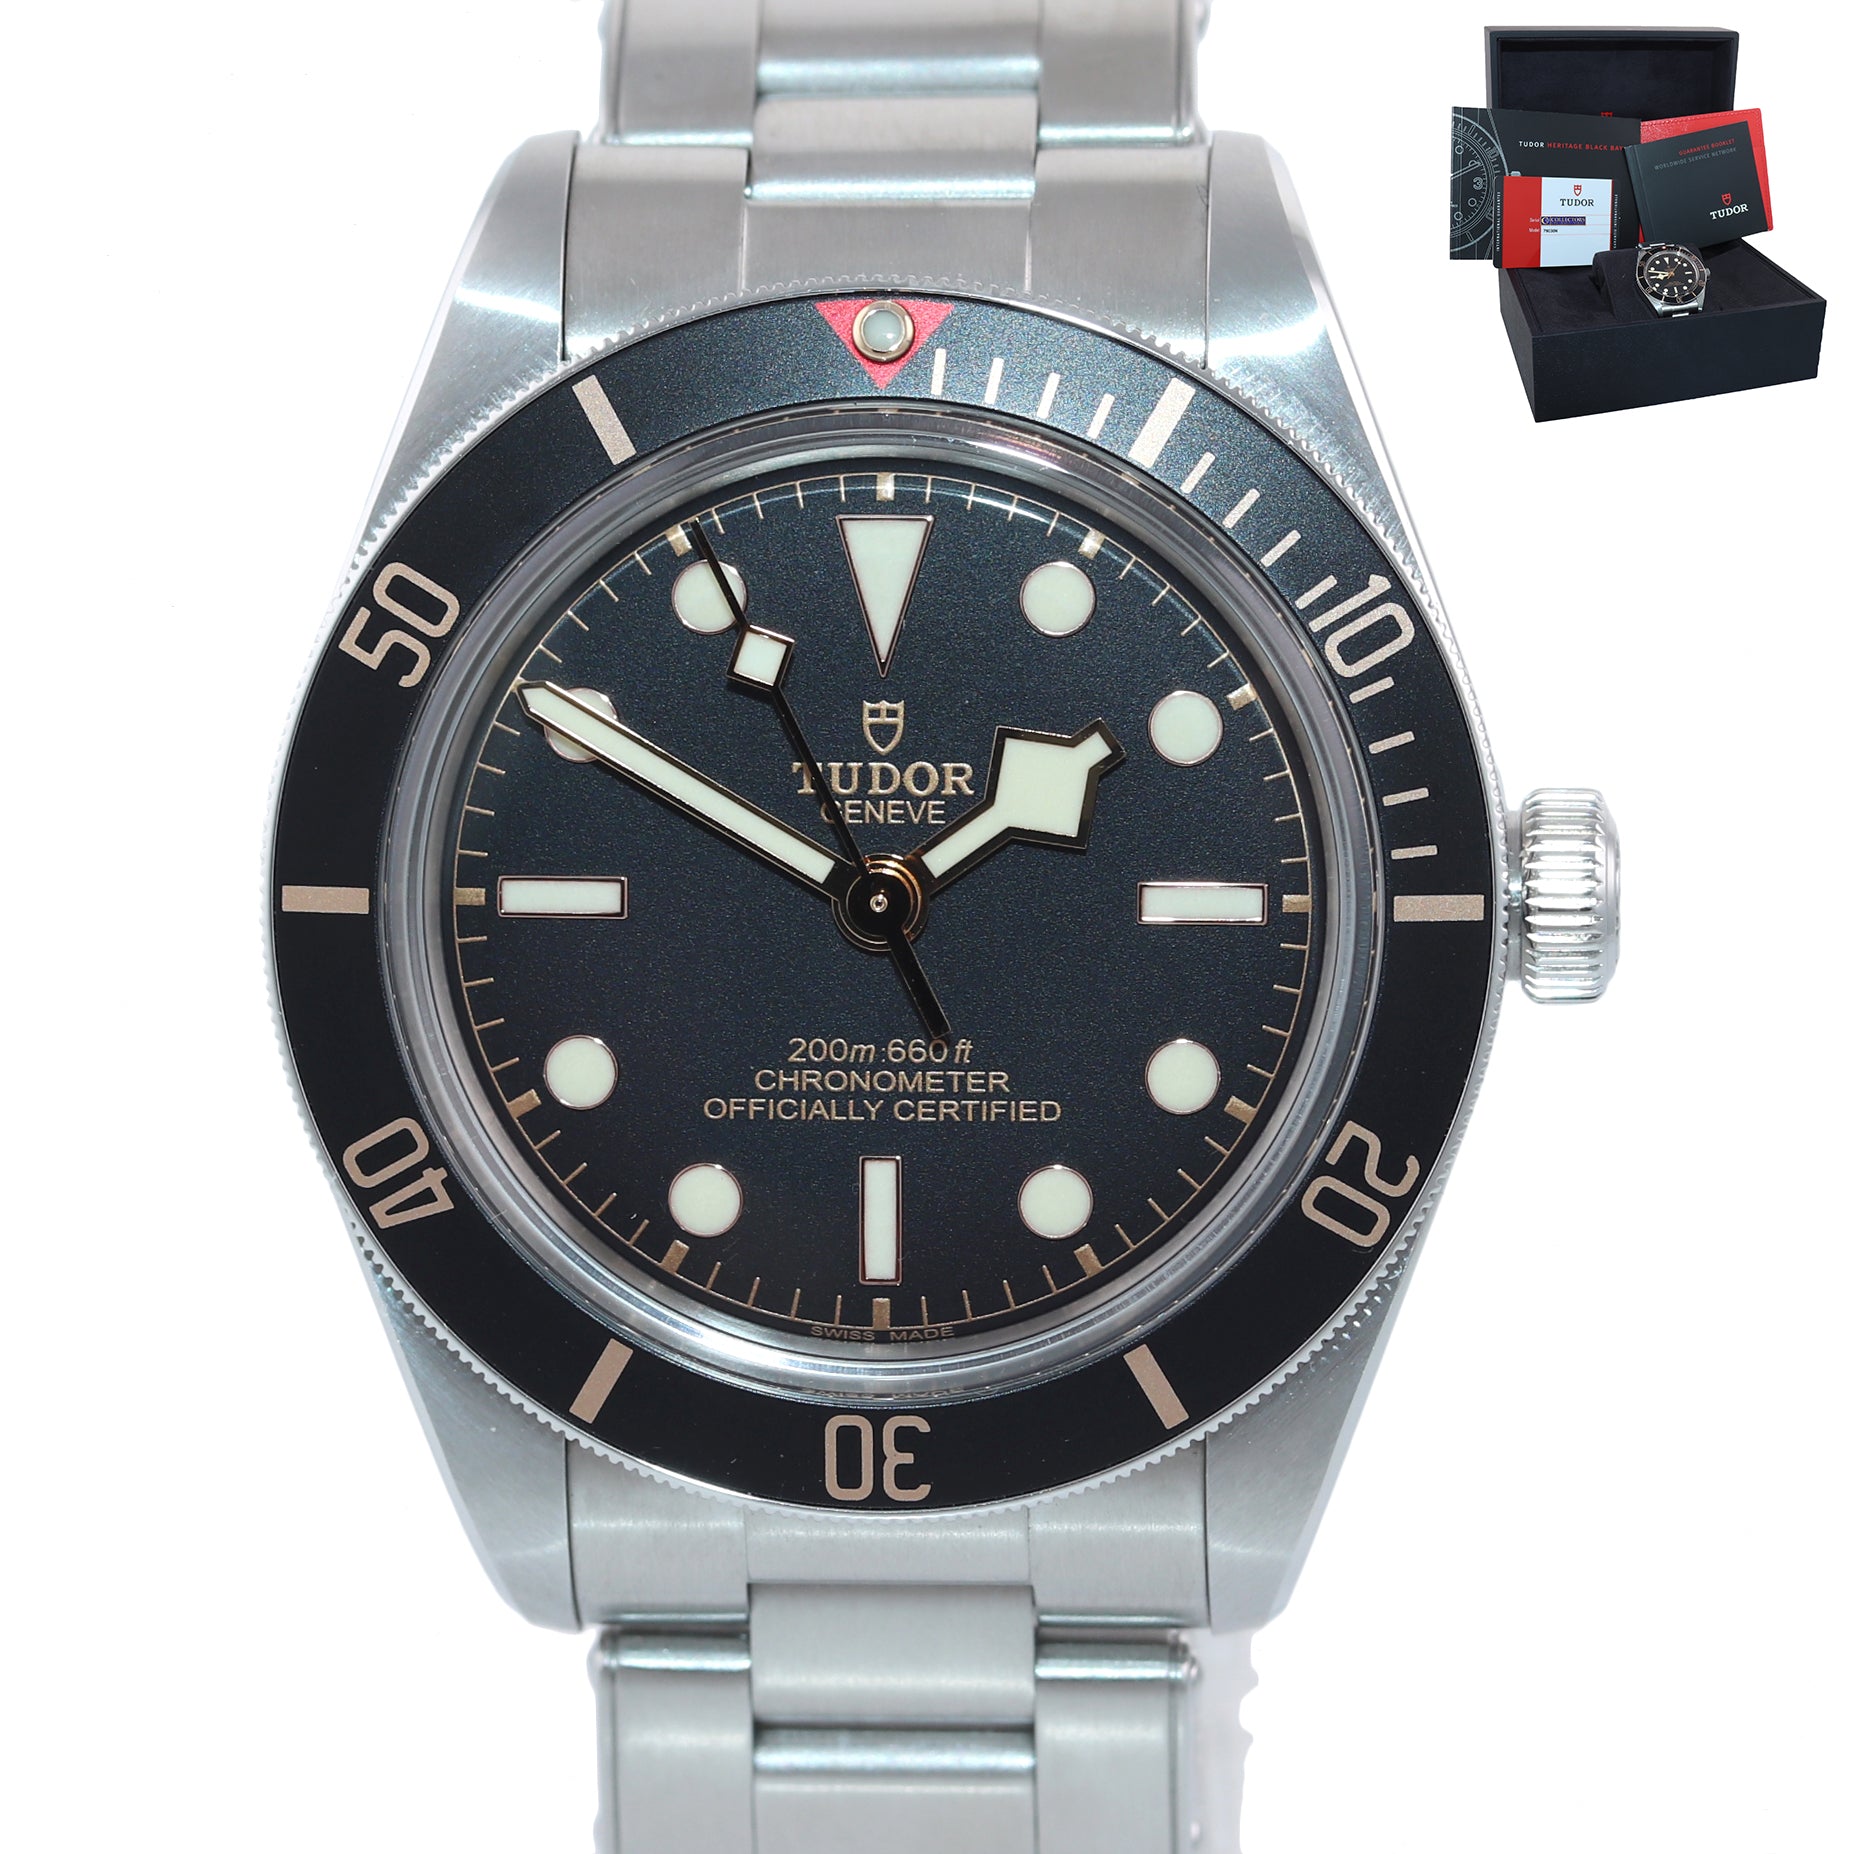 MINT 2019 Papers Tudor Black Bay Fifty-Eight 58 39mm Steel Watch 79030N Box